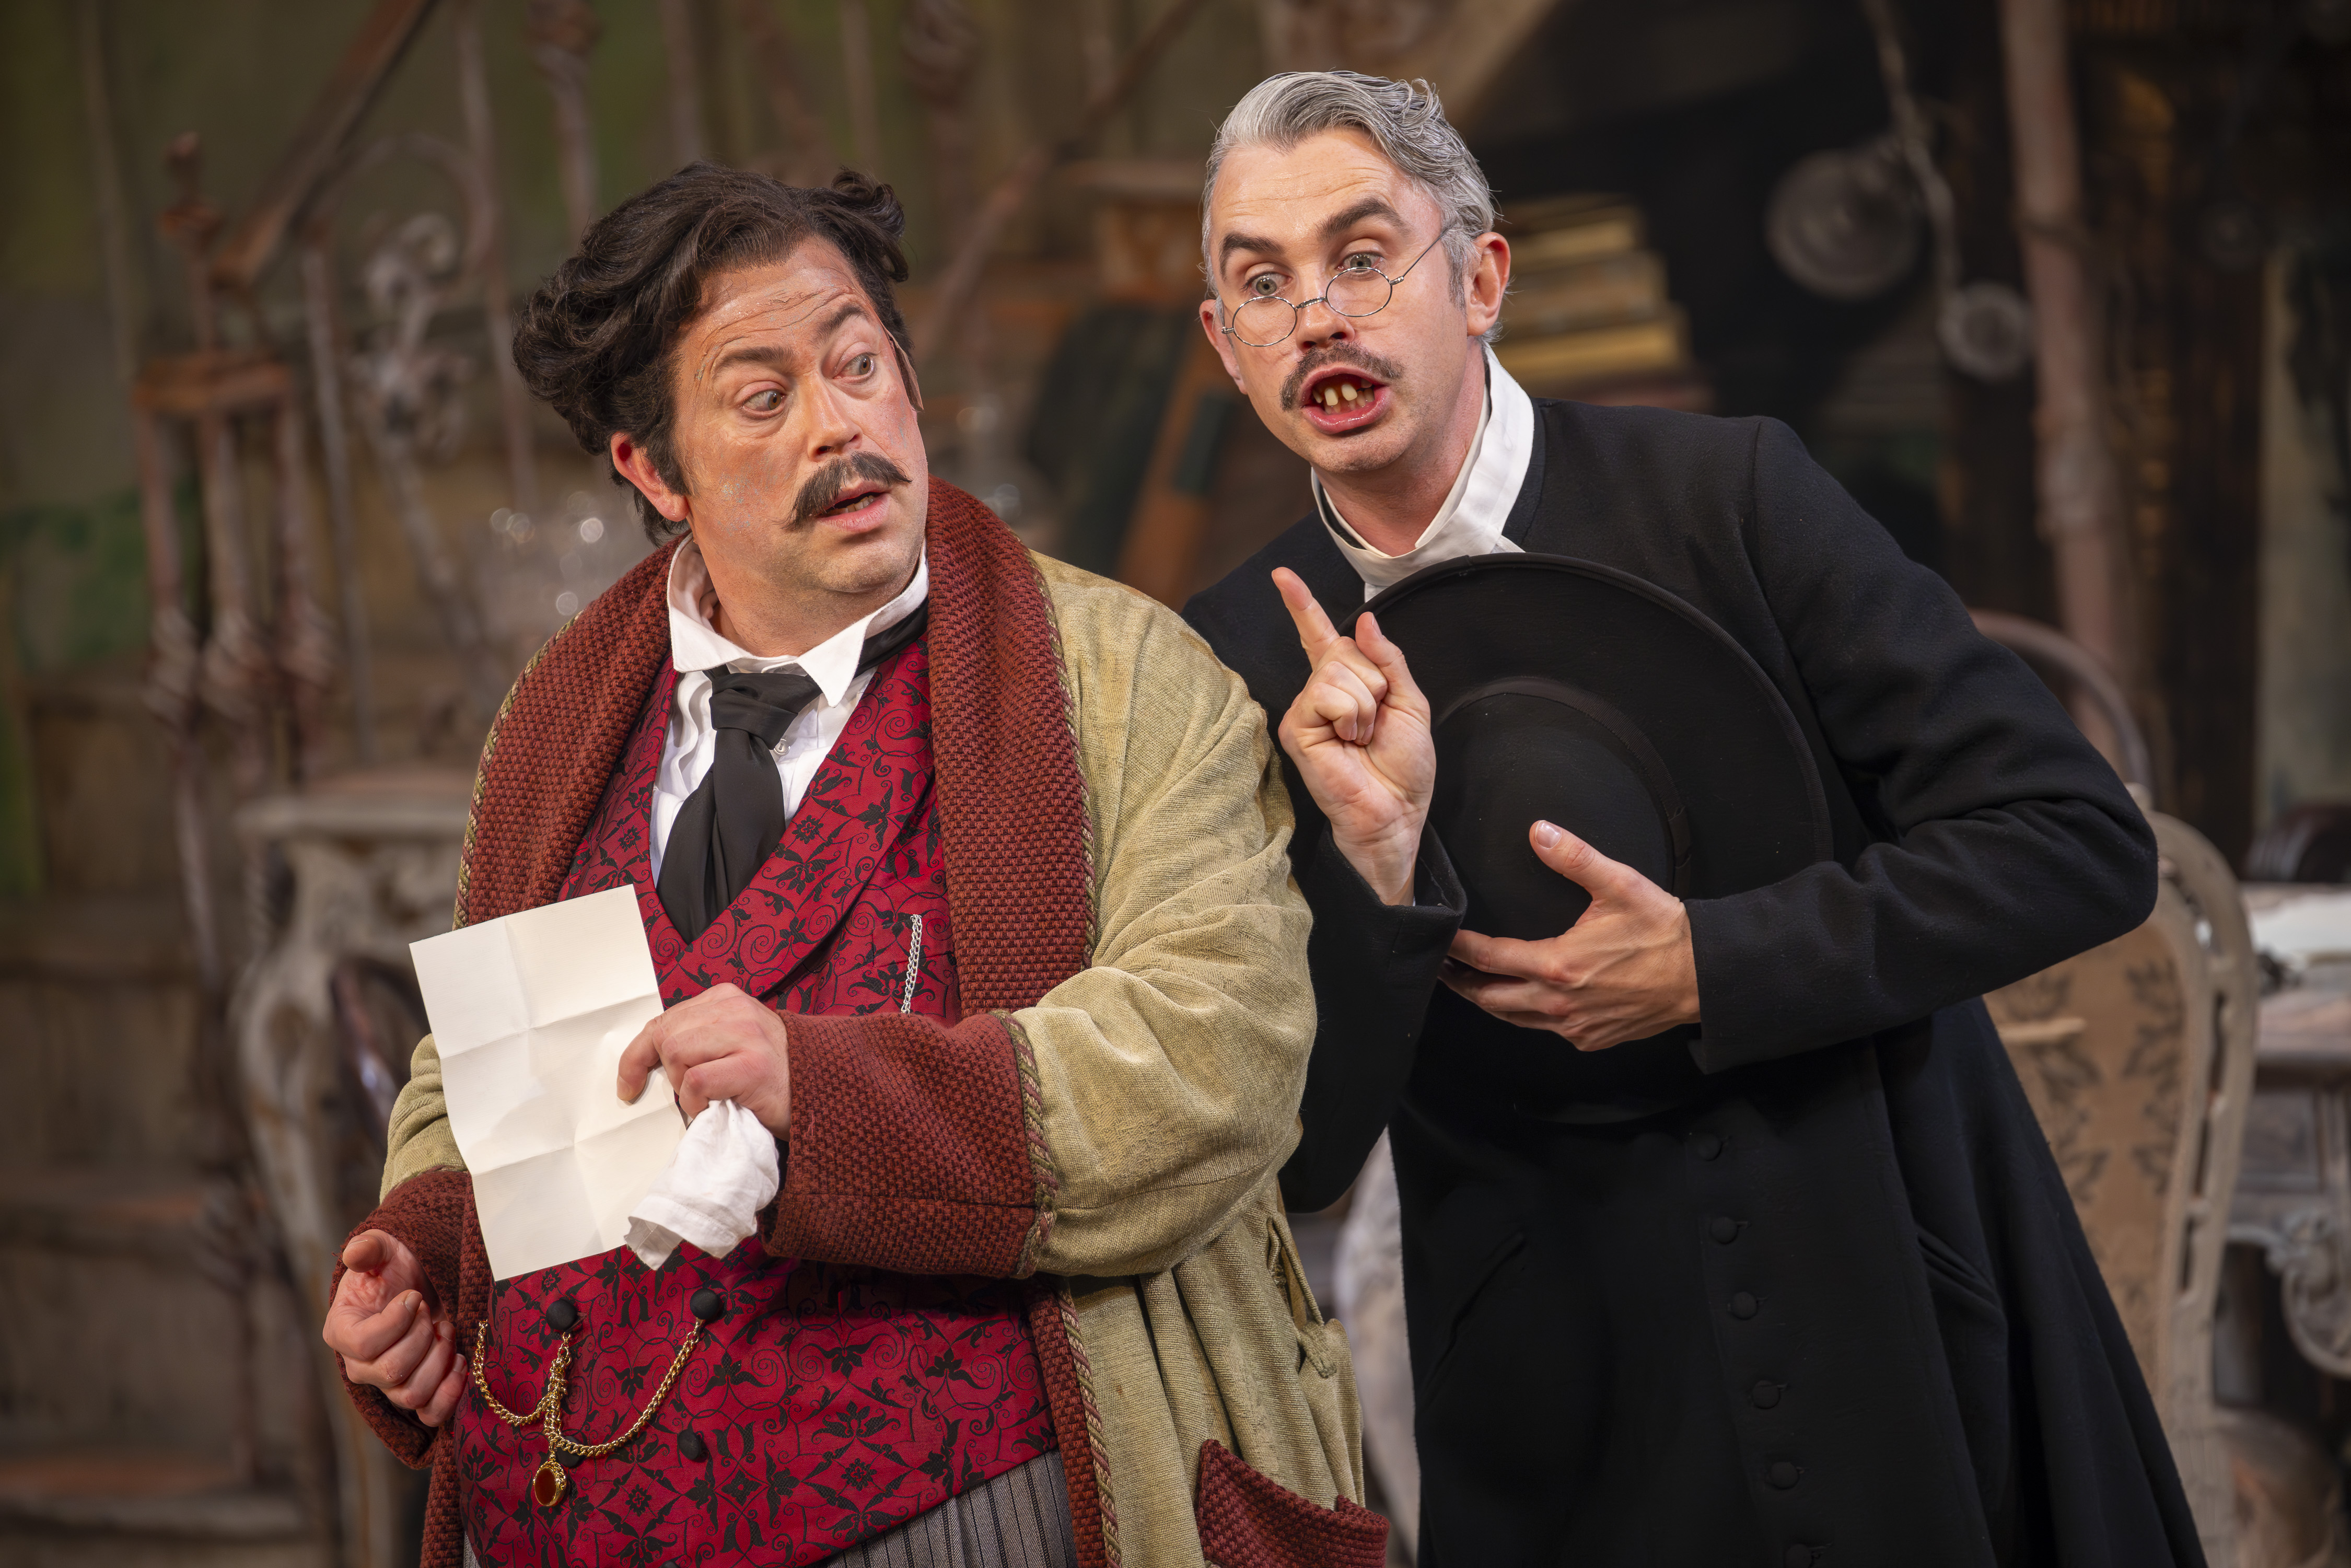 David Stout (Doctor Bartolo) And Anthony Gregory (Count Almaviva) In The Barber Of Seville. Scottish Opera 2023. Credit James Glossop.